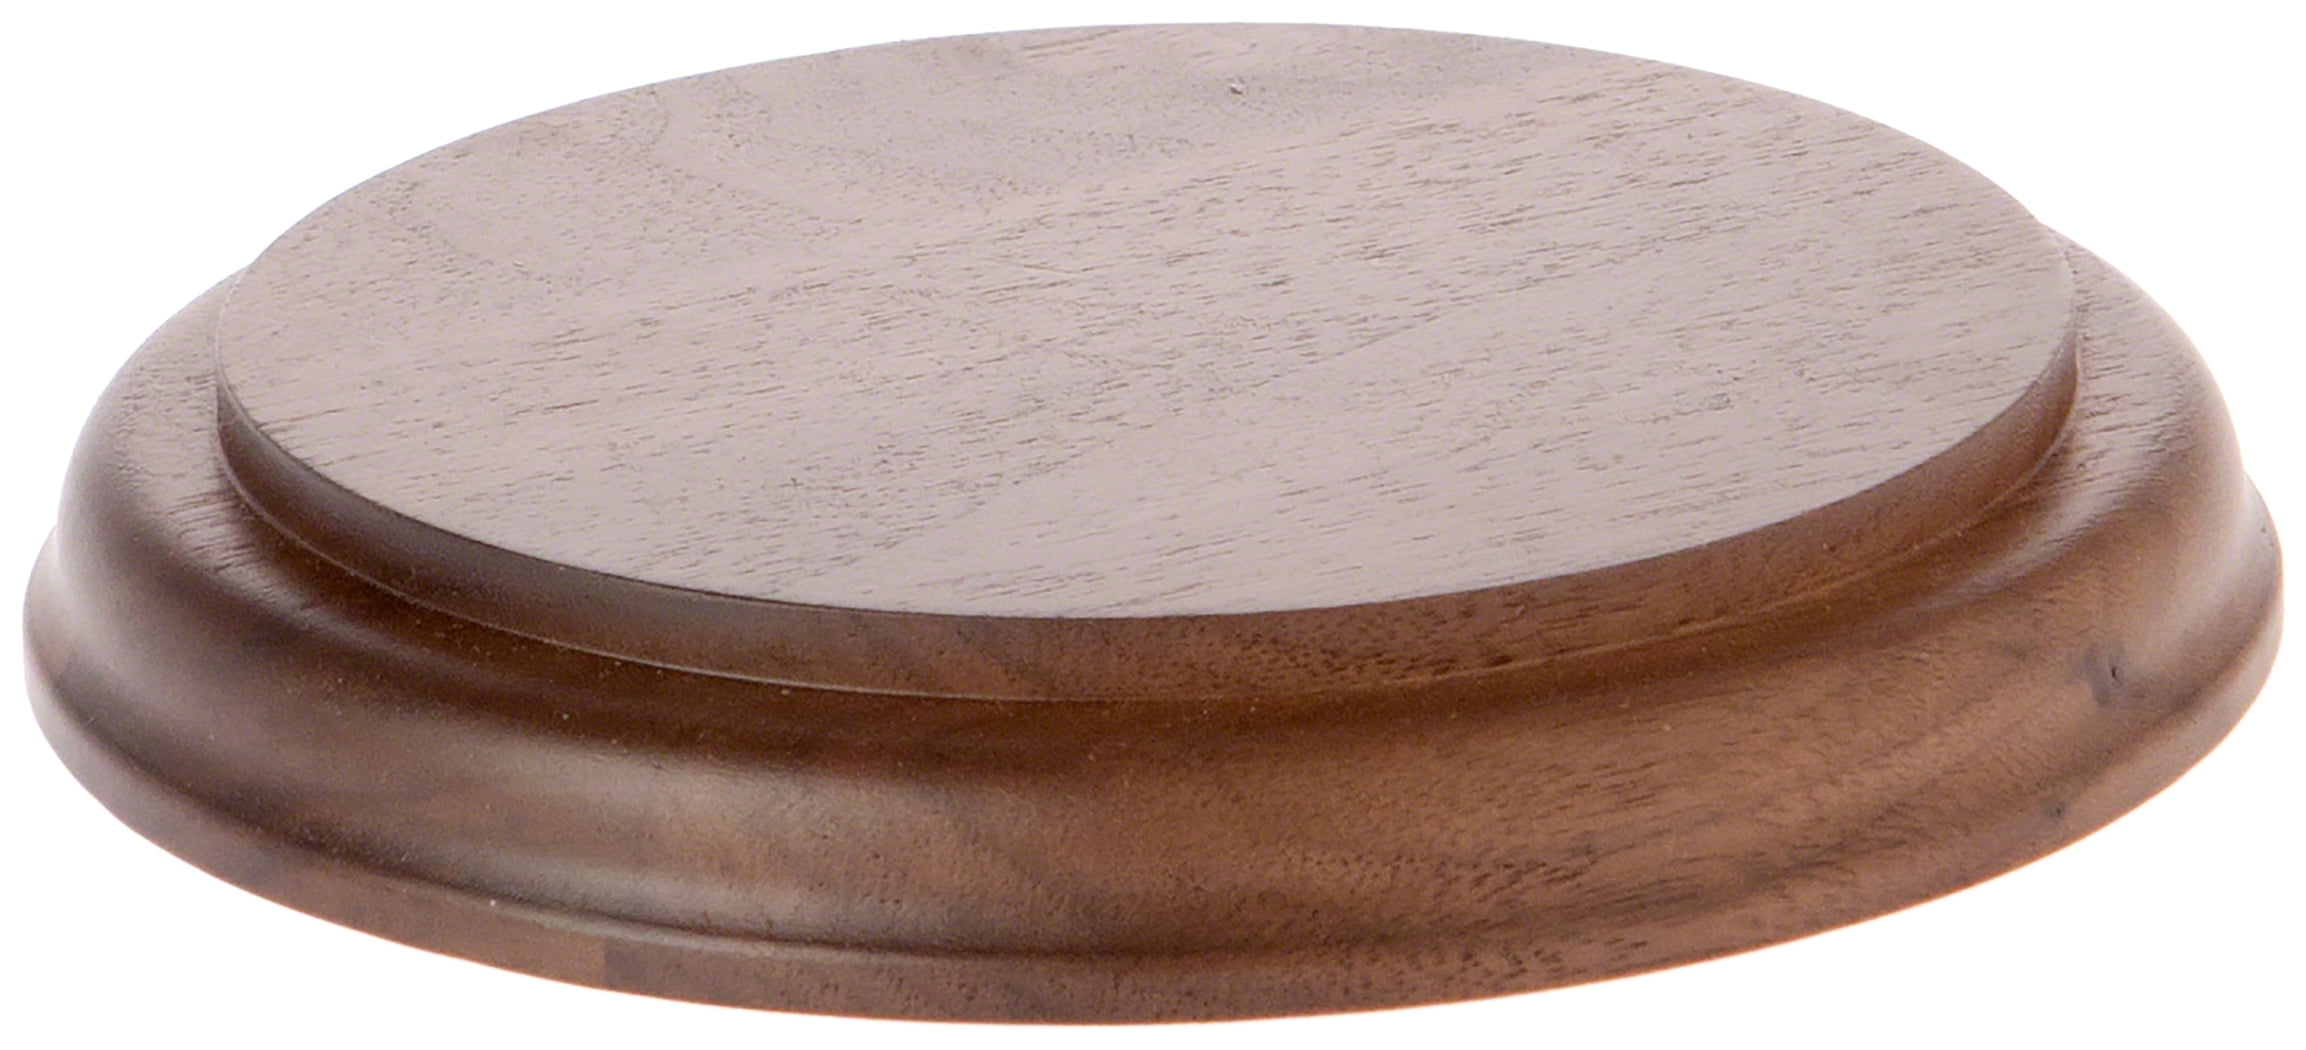 display base round  solid oak 5inch 128mm display size 